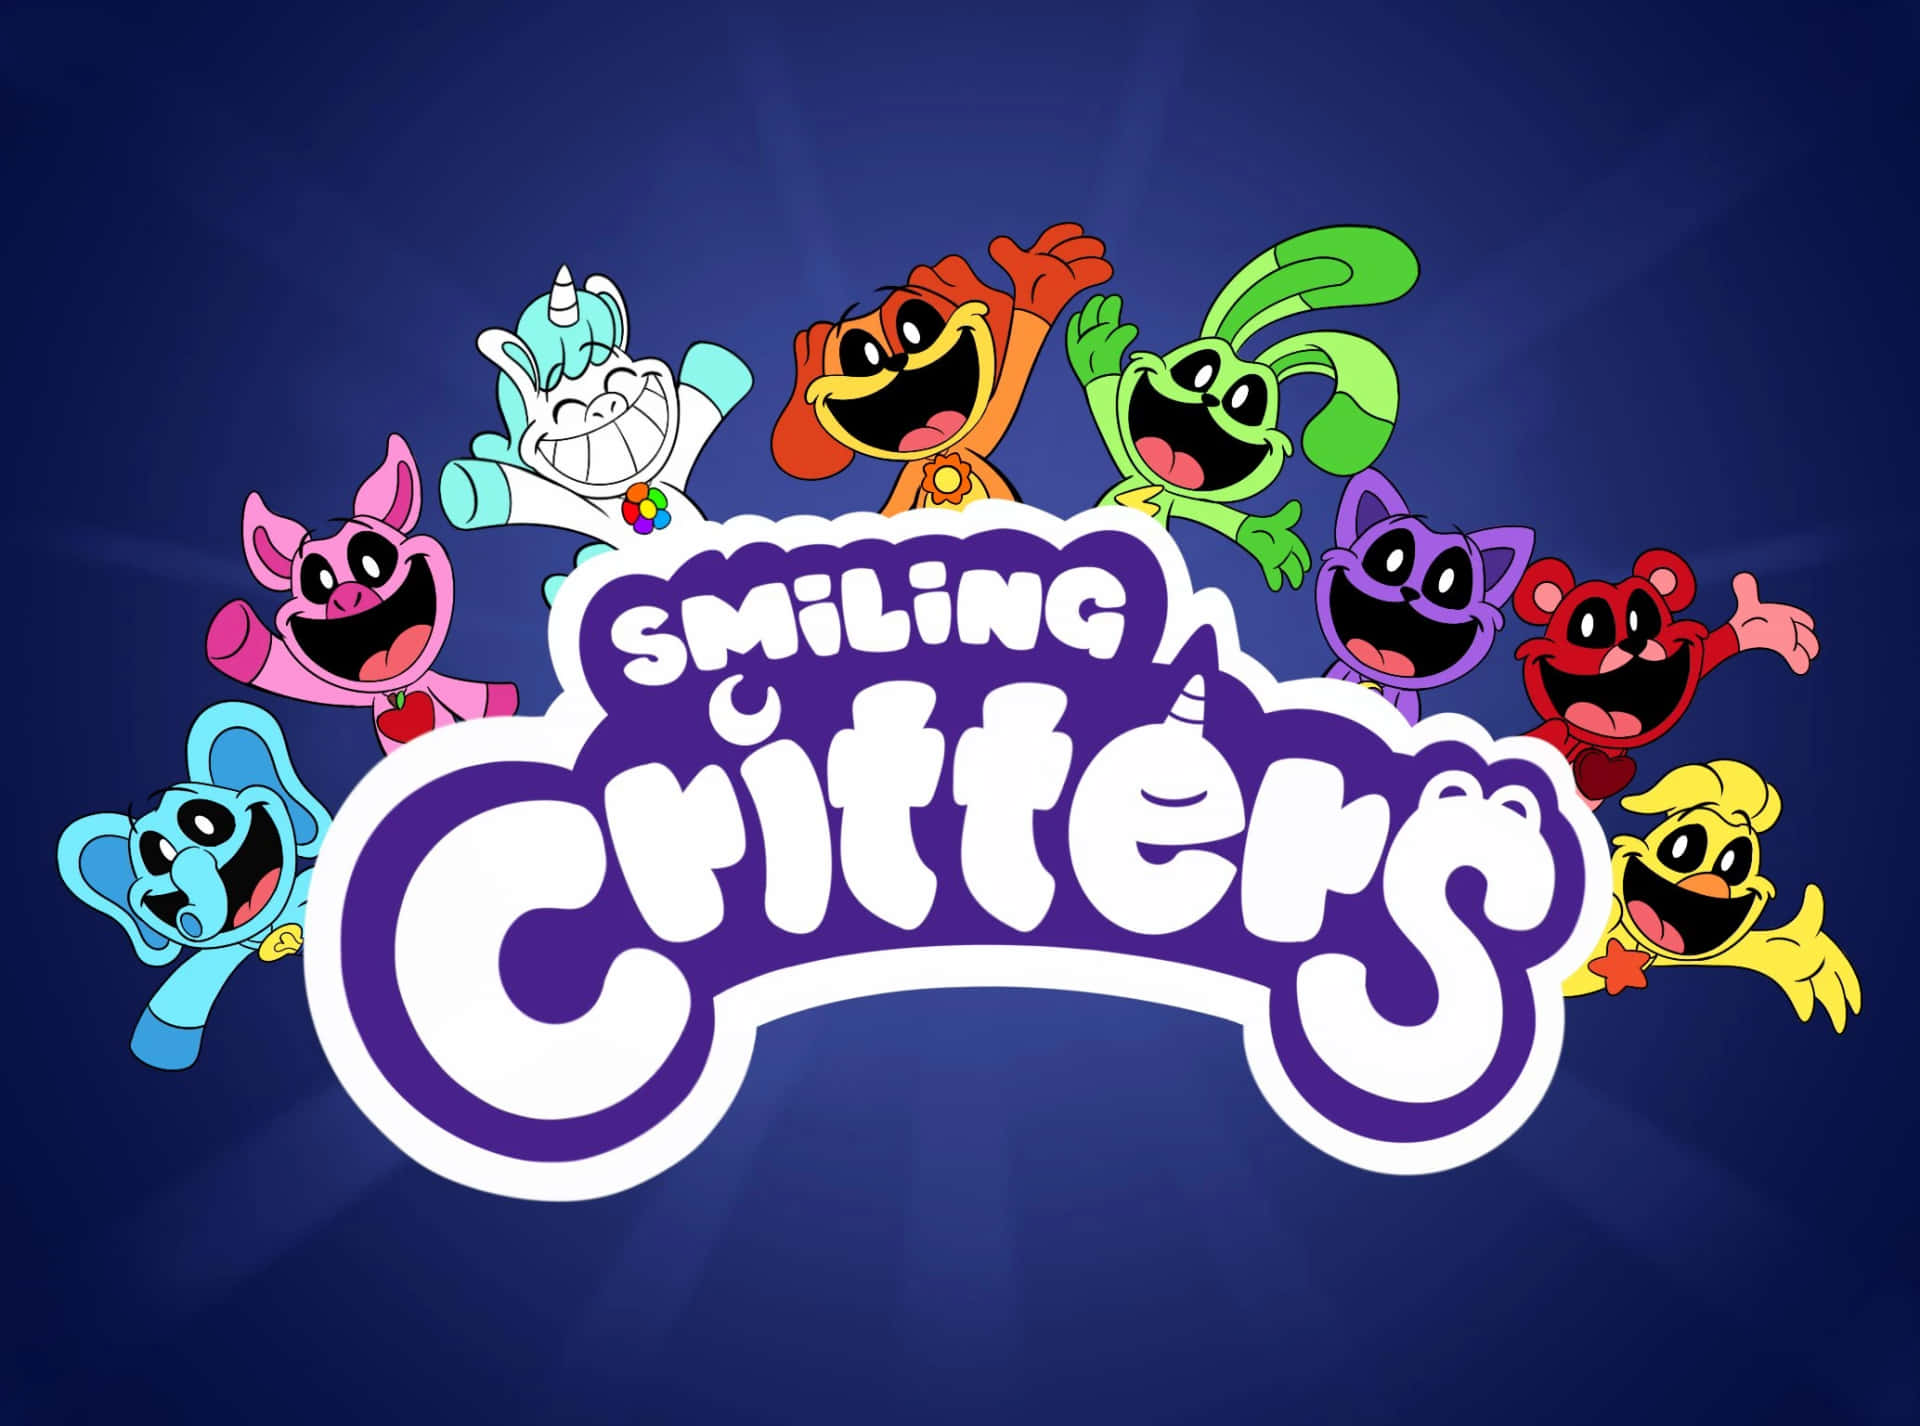 Smiling Critters Cartoon Characters Wallpaper